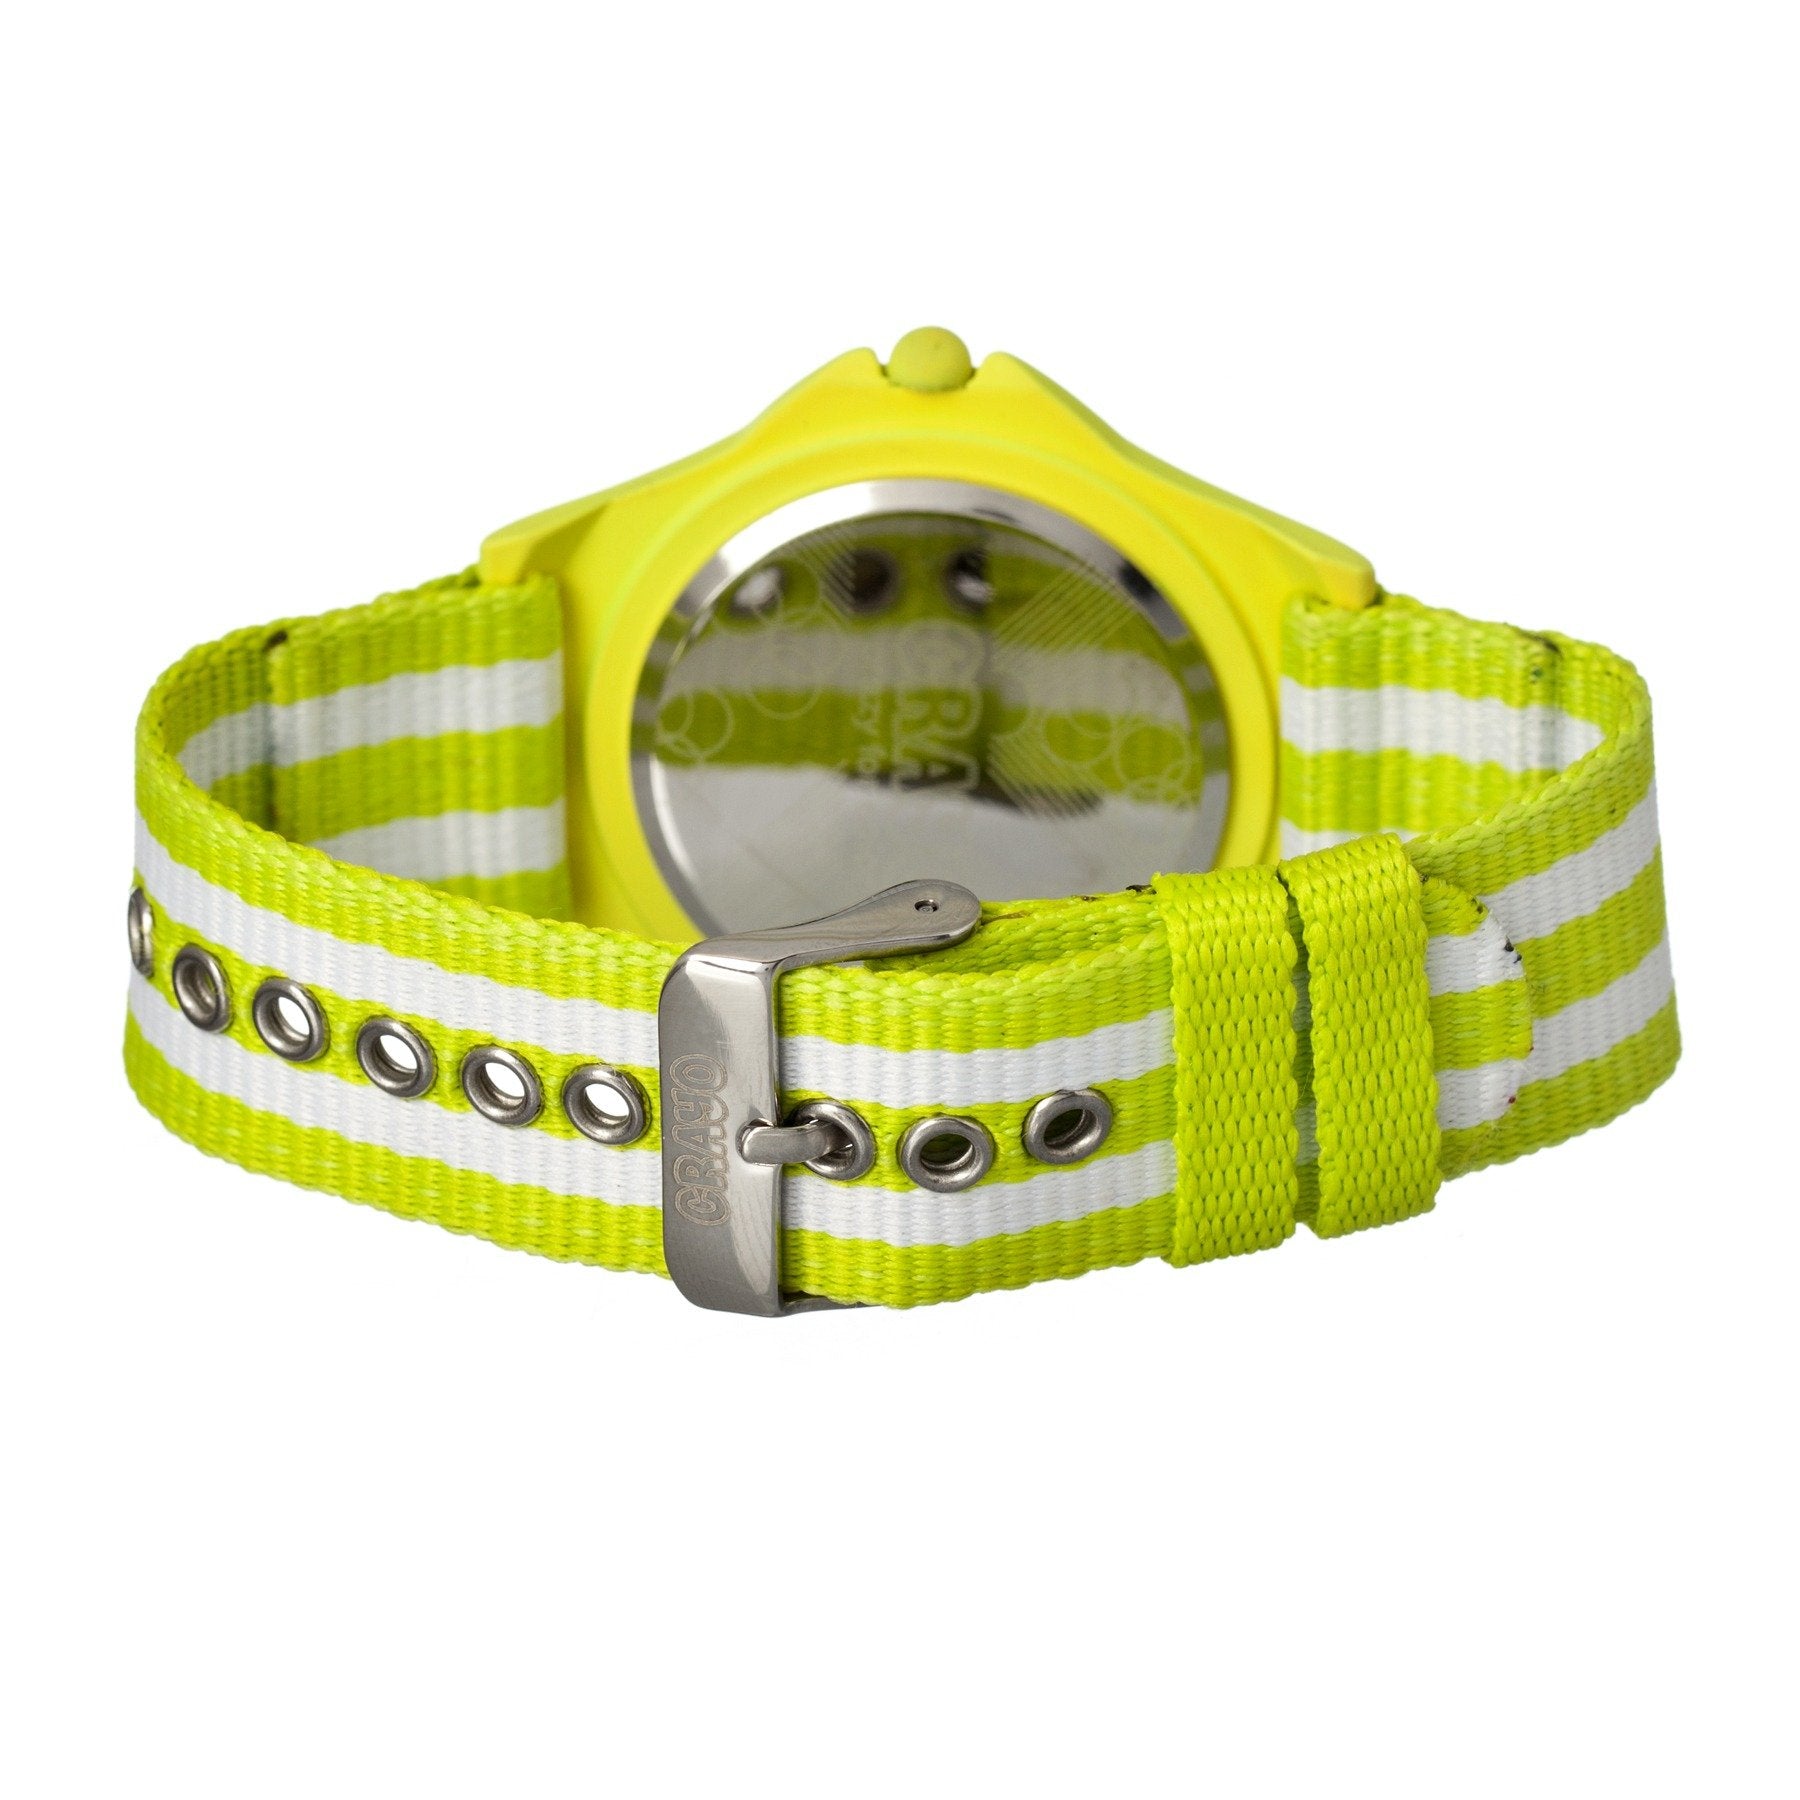 Crayo Carnival Nylon-Band Unisex Watch w/Date - Lime/White - CRACR0706